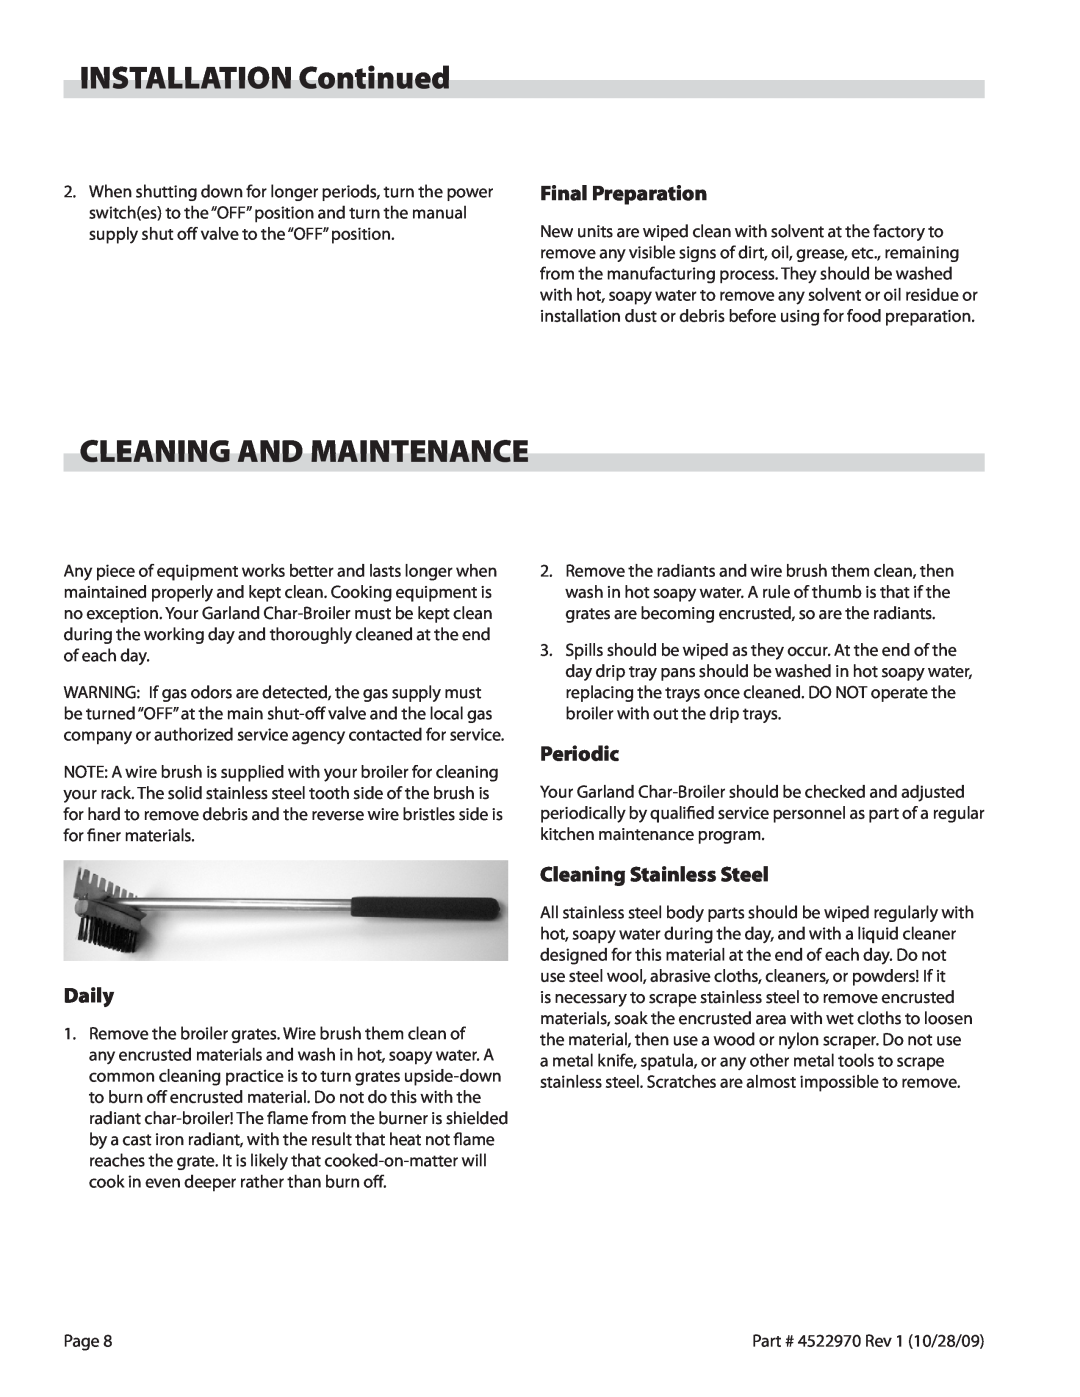 Garland 4522970 REV 1 operation manual Cleaning And Maintenance, INSTALLATION Continued, Final Preparation, Daily, Periodic 